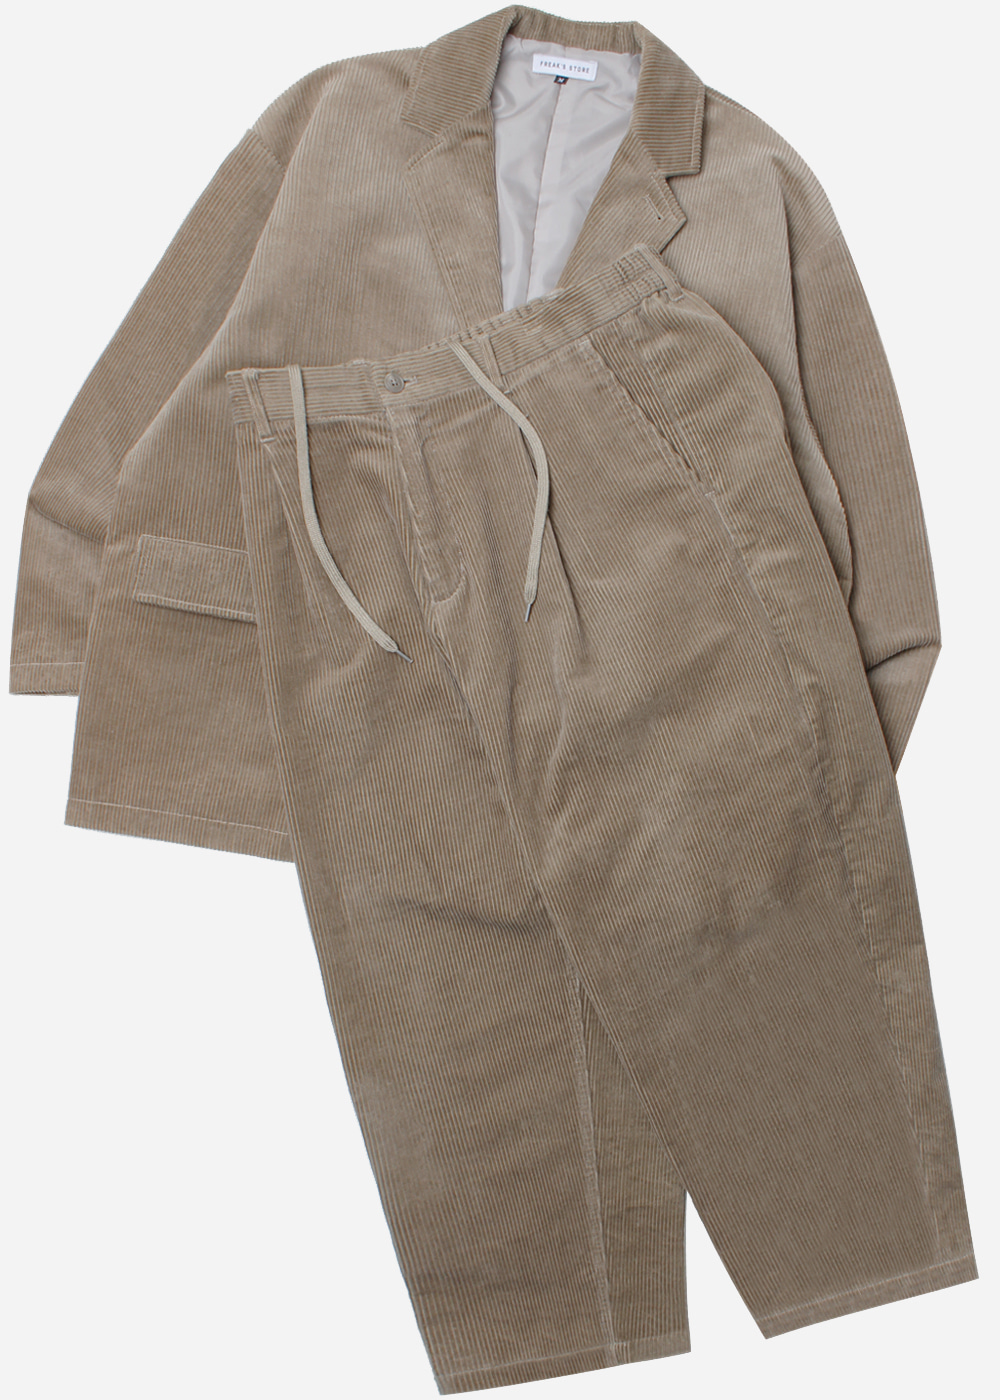 FREAK’S STORE’over fit’ corduroy two-piece work jacket pant